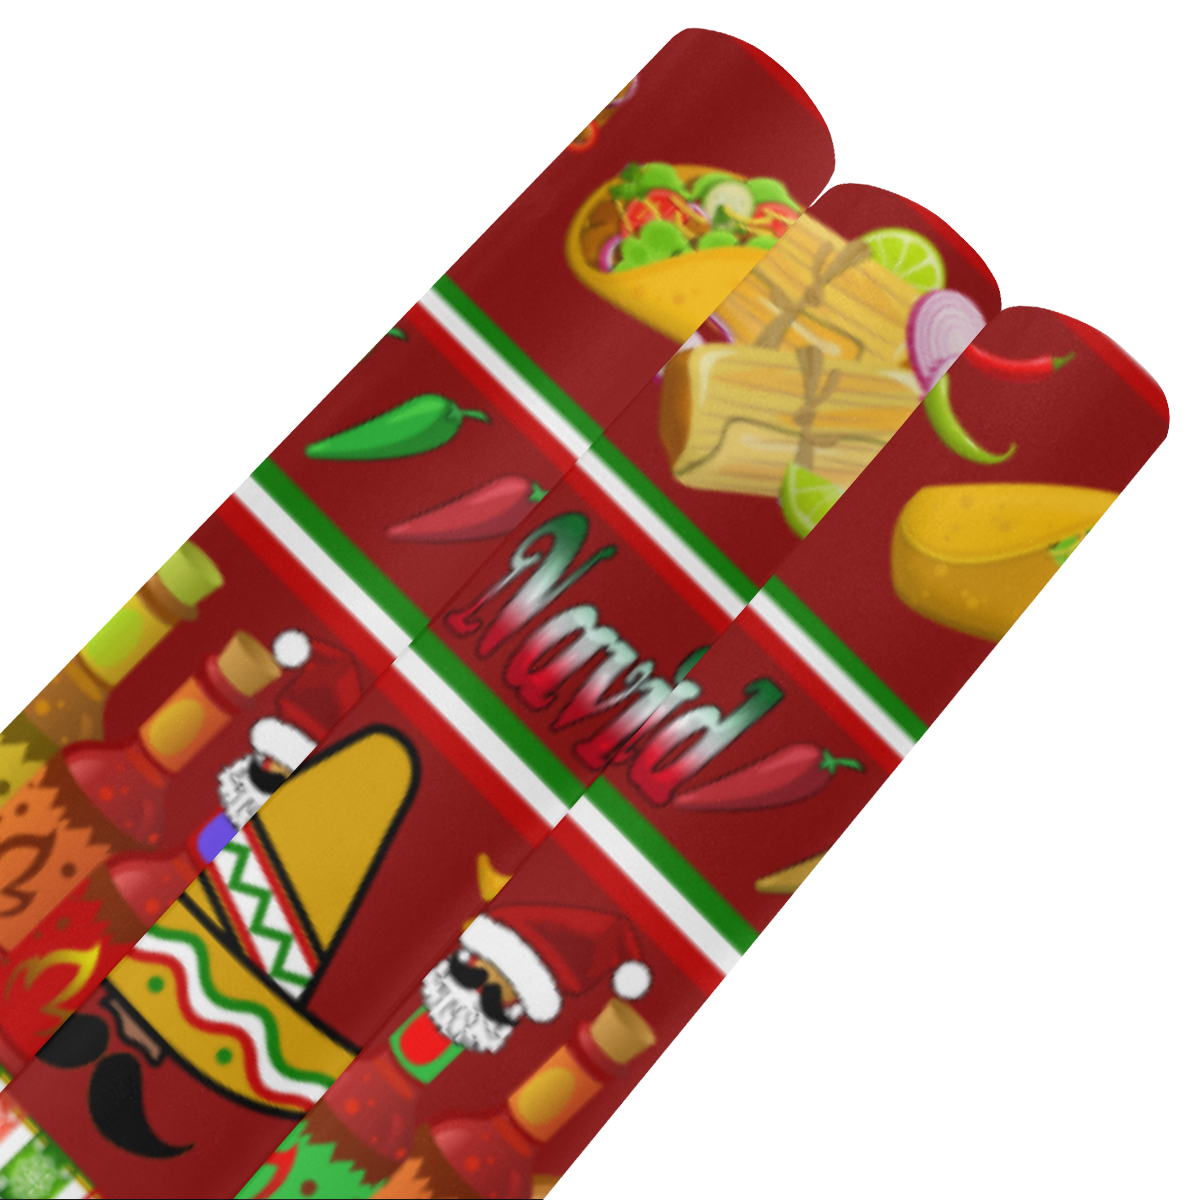 Feliz Navidad Ugly Sweater on Red Gift Wrapping Paper 58"x 23" (3 Rolls)